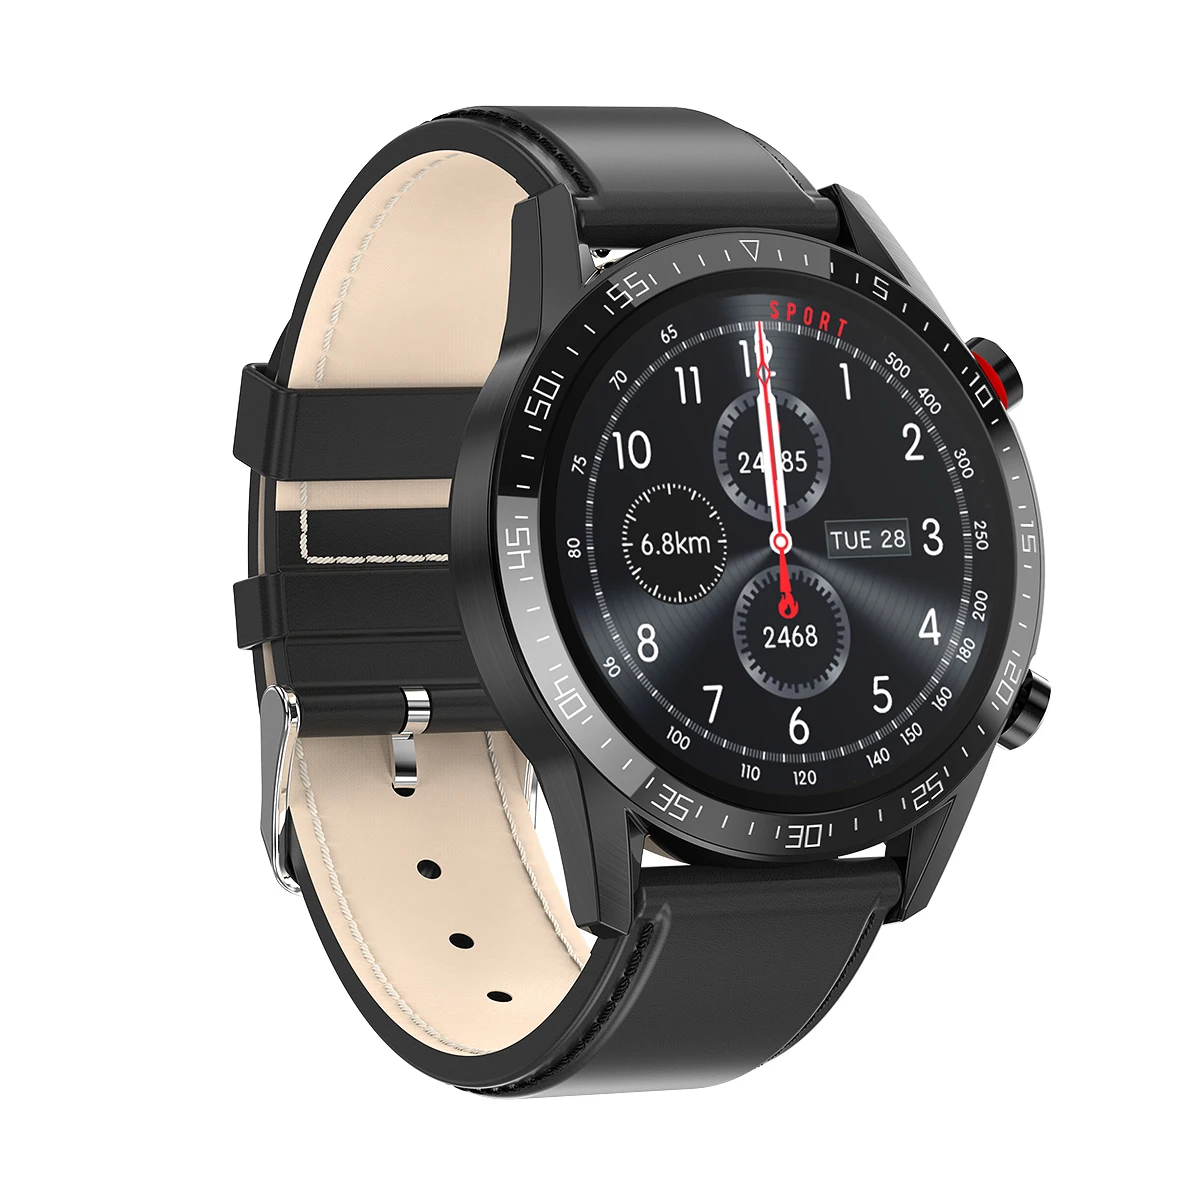 

L13 BT Call Watch Android For Fashionable IP68 Waterproof Smart Watches With Notifications Sync L13 Smart Watches Man